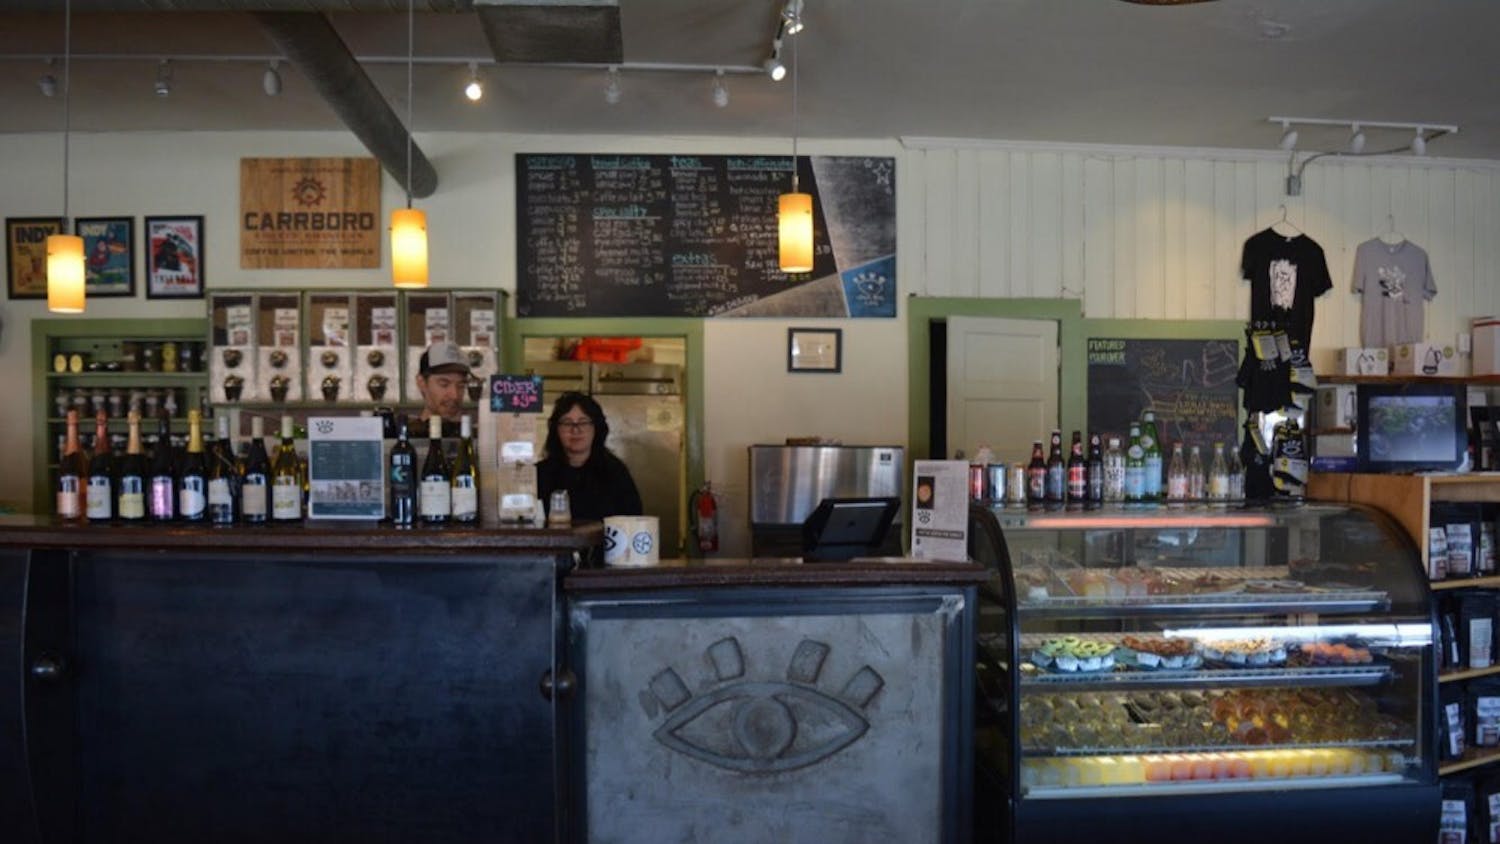 Coffee shops, including Open Eye in Carrboro, are coming together to donate part of their profits&nbsp;to the American Civil Liberties Union.&nbsp;